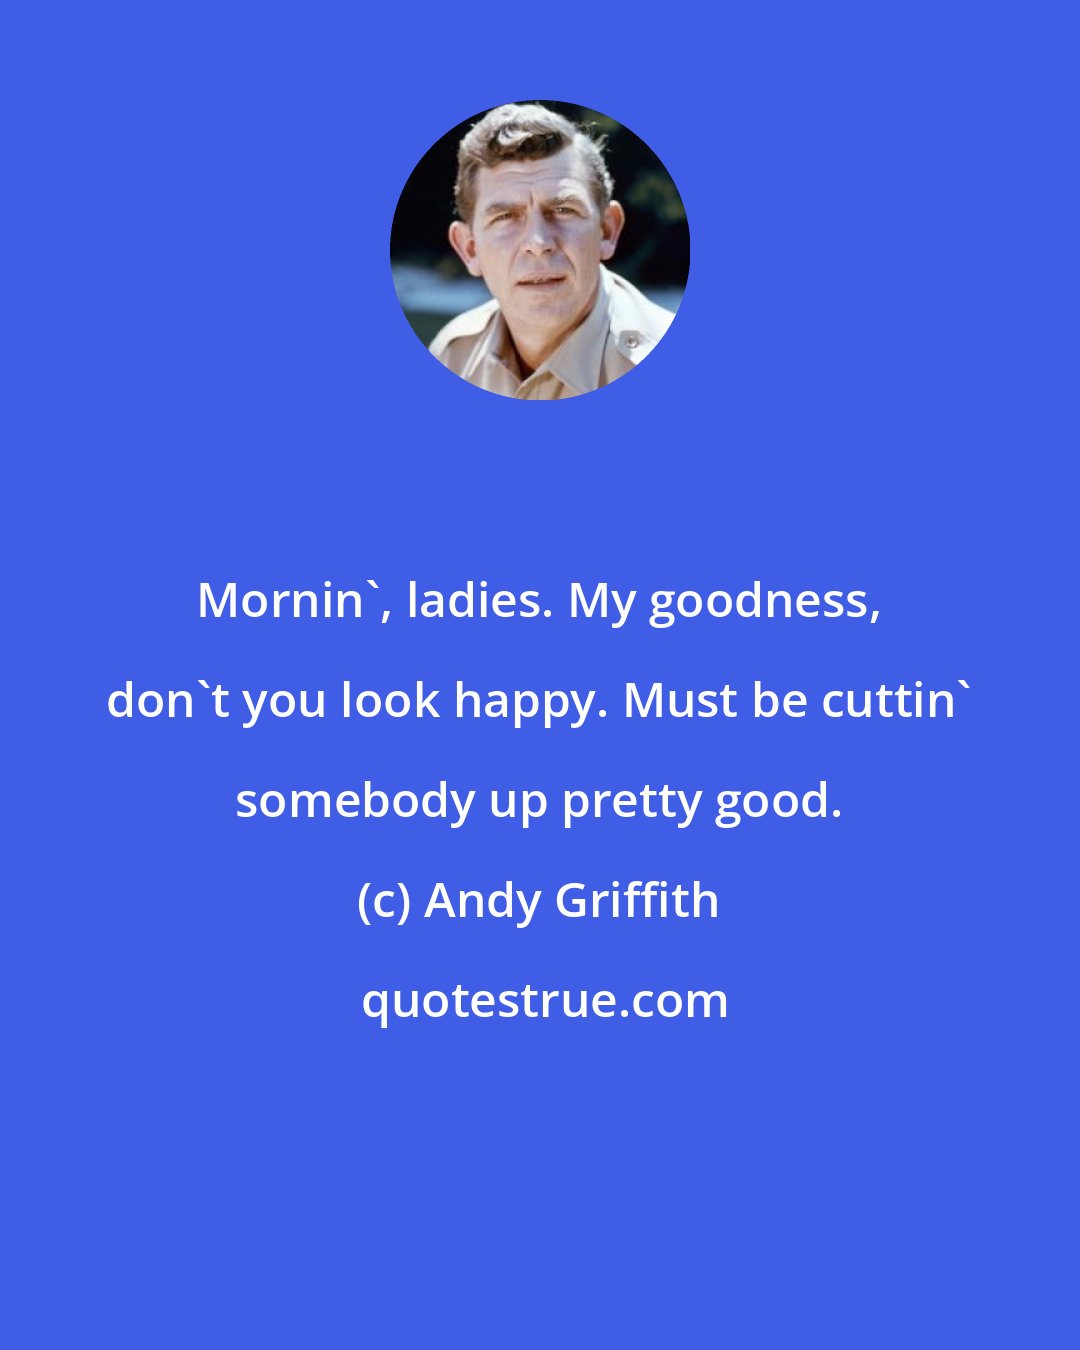 Andy Griffith: Mornin', ladies. My goodness, don't you look happy. Must be cuttin' somebody up pretty good.